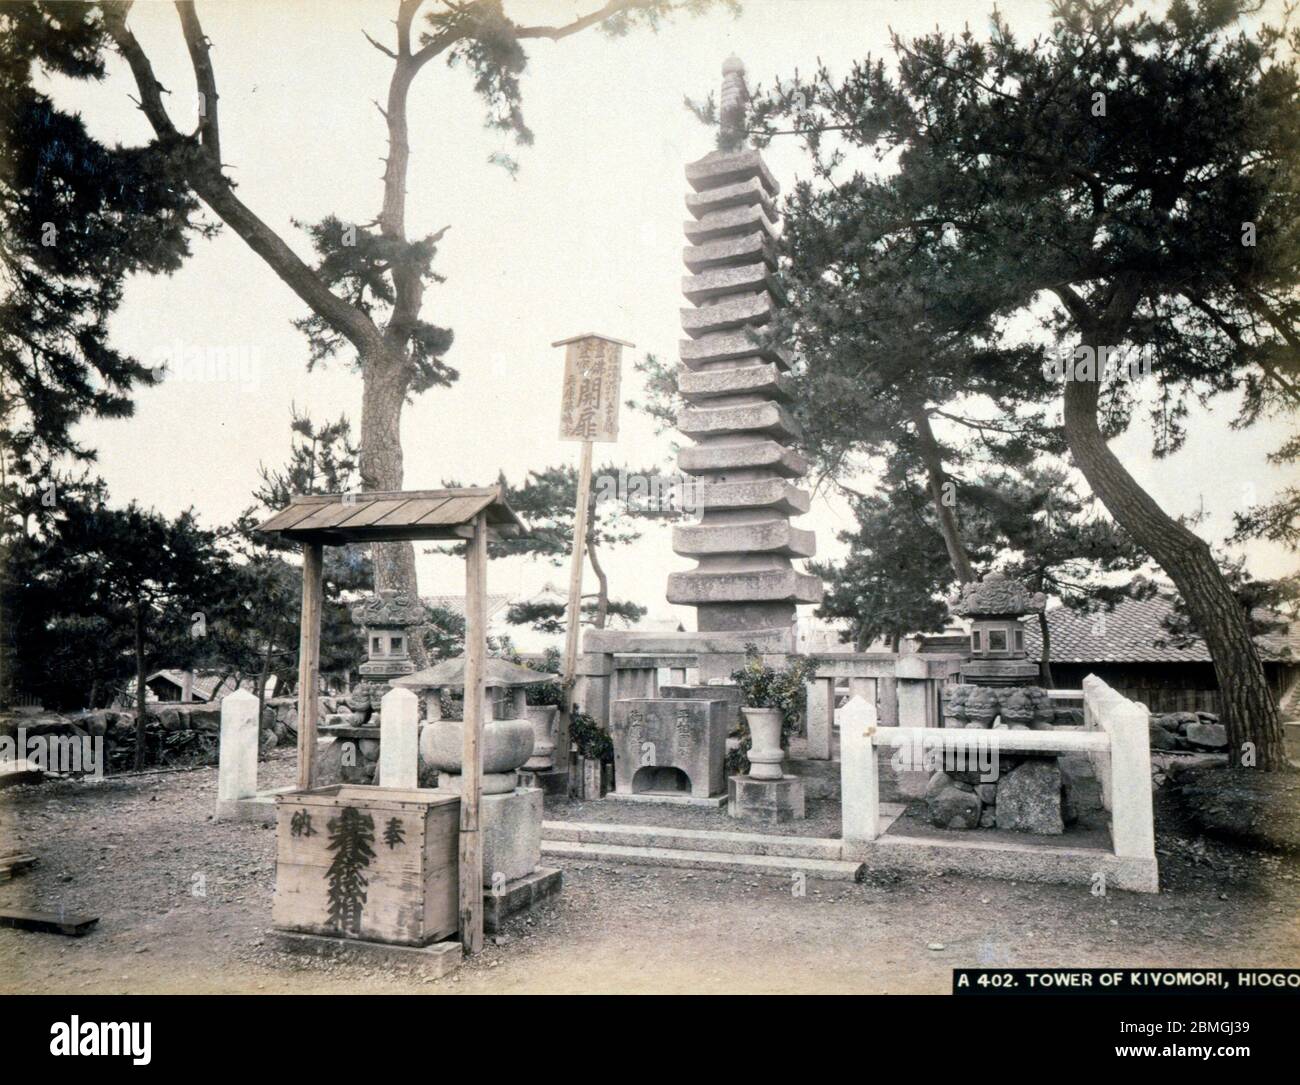 [ 1880s Japan - Taira no Kiyomori Memorial ] —   Kiyomorizuka (清盛塚) is a thirteen-storied 8.5 meter tall stone pagoda in Hyogo, Kobe. Built in 1286, it commerates Taira no Kiyomori (平清盛).  Taira no Kiyomori was a general of the late Heian Period (794-1185) who established the first samurai-dominated administrative government in Japan. Taira no Kiyomori is the main character in the Tale of Heike (平家物語, Heike Monogatari).  19th century vintage albumen photograph. Stock Photo